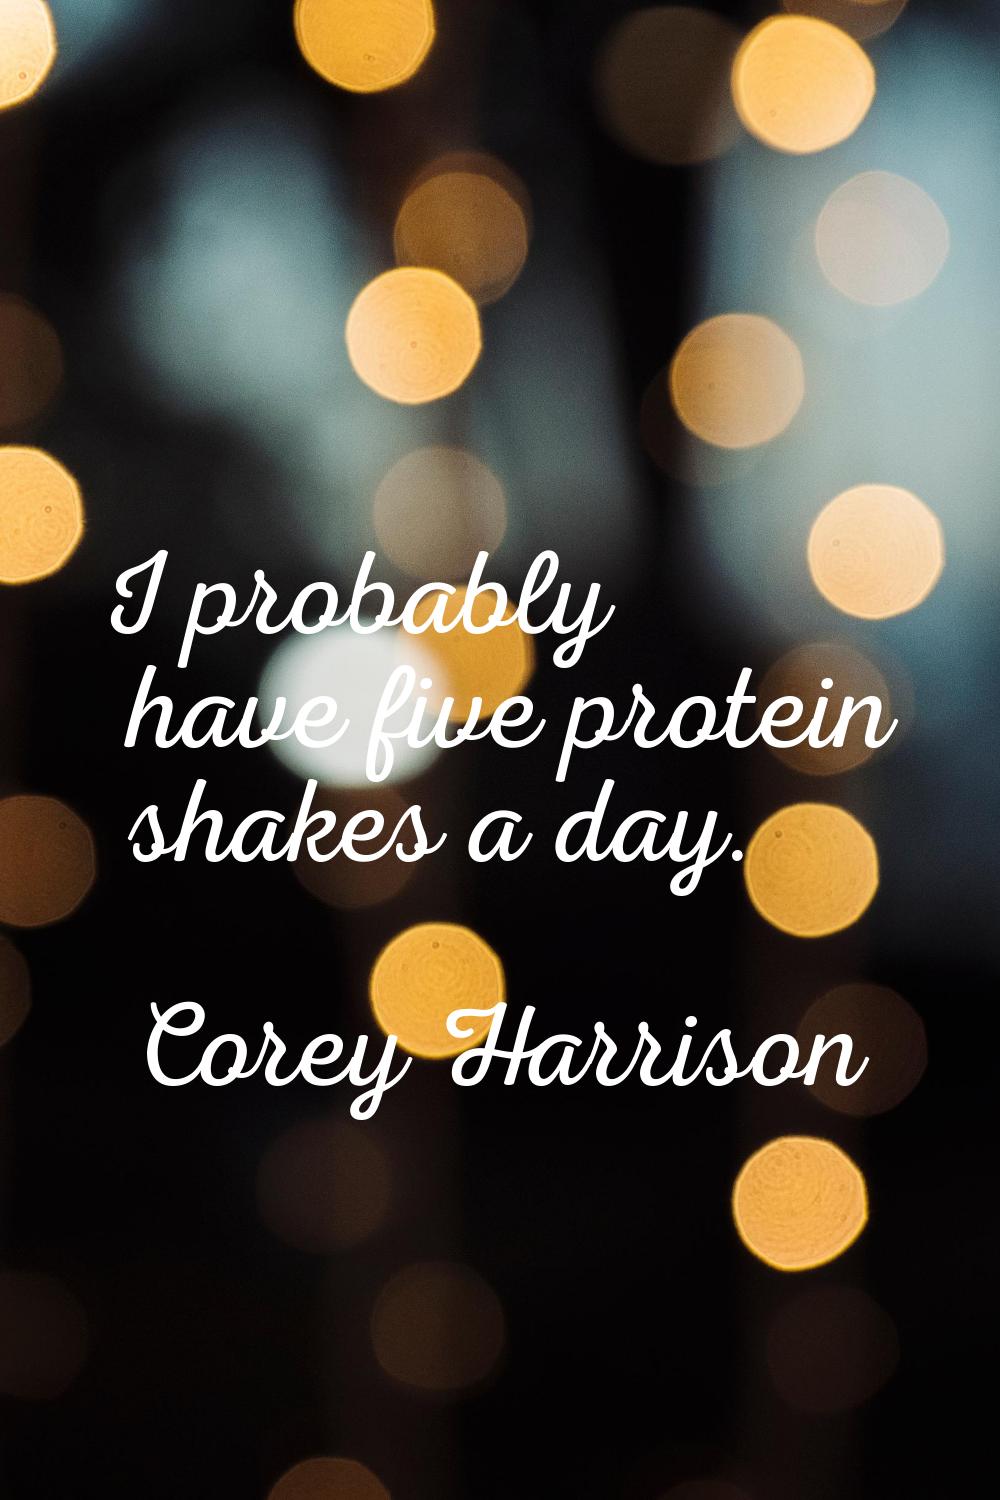 I probably have five protein shakes a day.